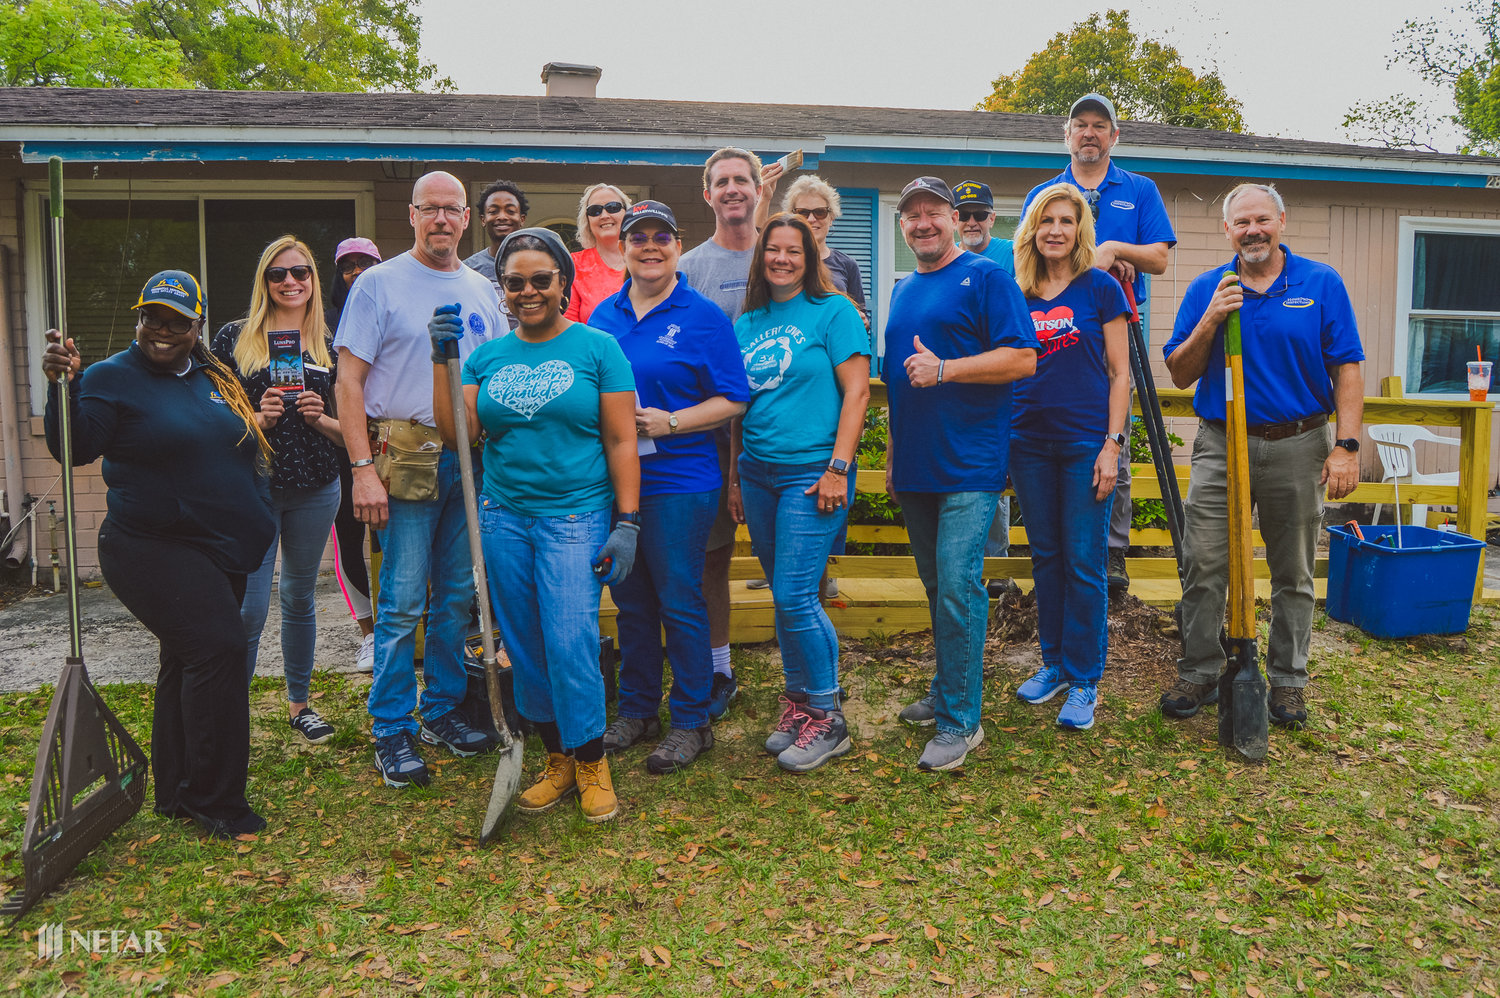 Members of Northeast Florida Association of Realtors turned out to build two decks and wheelchair access ramps at the Southside home of an amputee and his disabled wife on March 23.